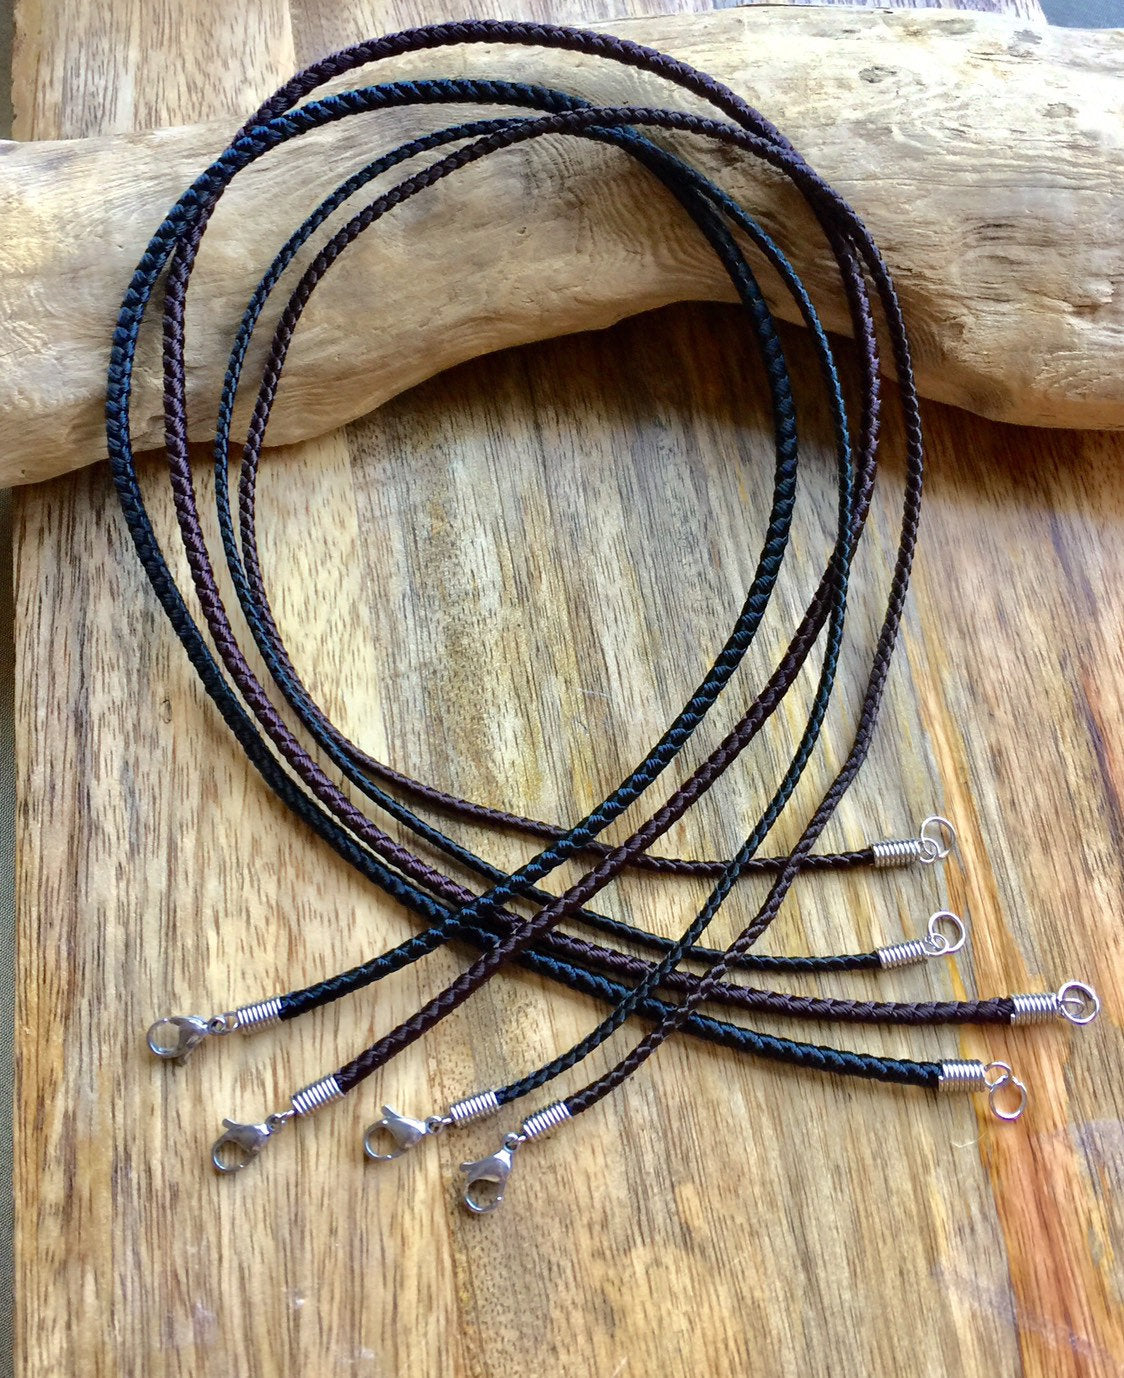 Waterproof Necklace,black Braided Cord Necklace, Mens Black Choker, Necklace  for Pendant, Surfer Choker, Custom Sized Choker, Hypoallergenic 